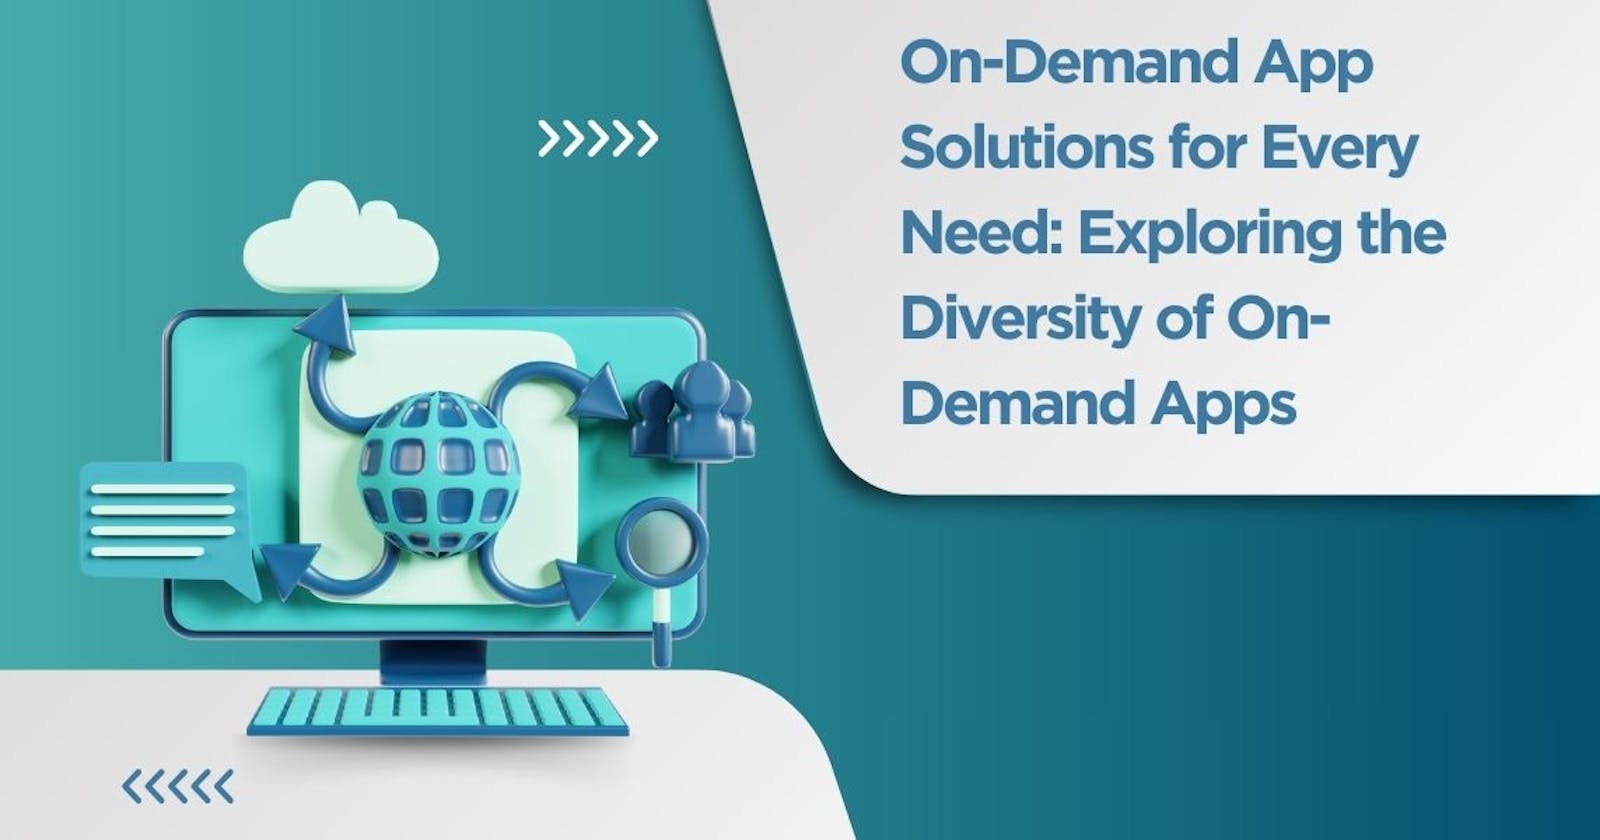 On-Demand App Solutions for Every Need: Exploring the Diversity of On-Demand Apps